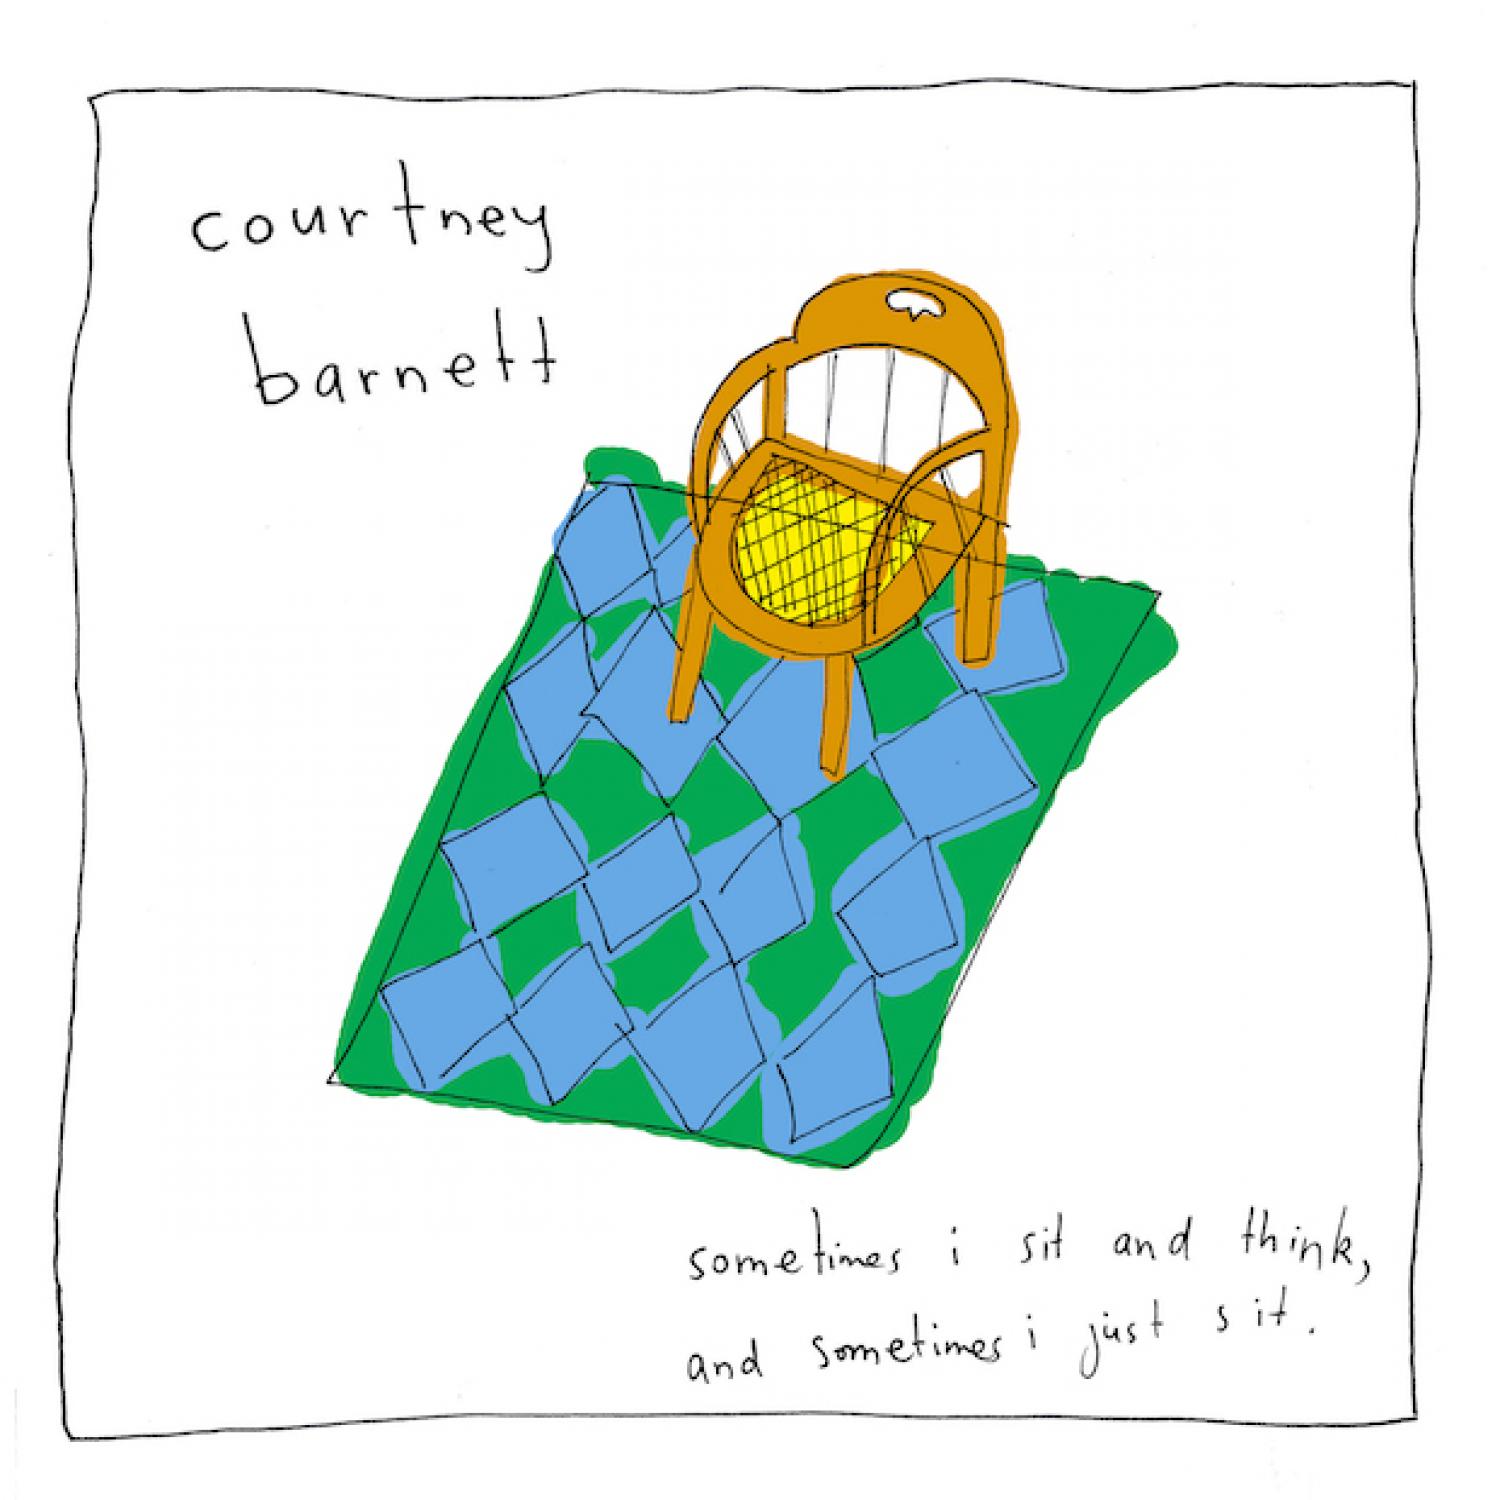 8. COURTNEY BARNETT | "SOMETIMES I SIT AND THINK, AND SOMETIMES I JUST SIT"